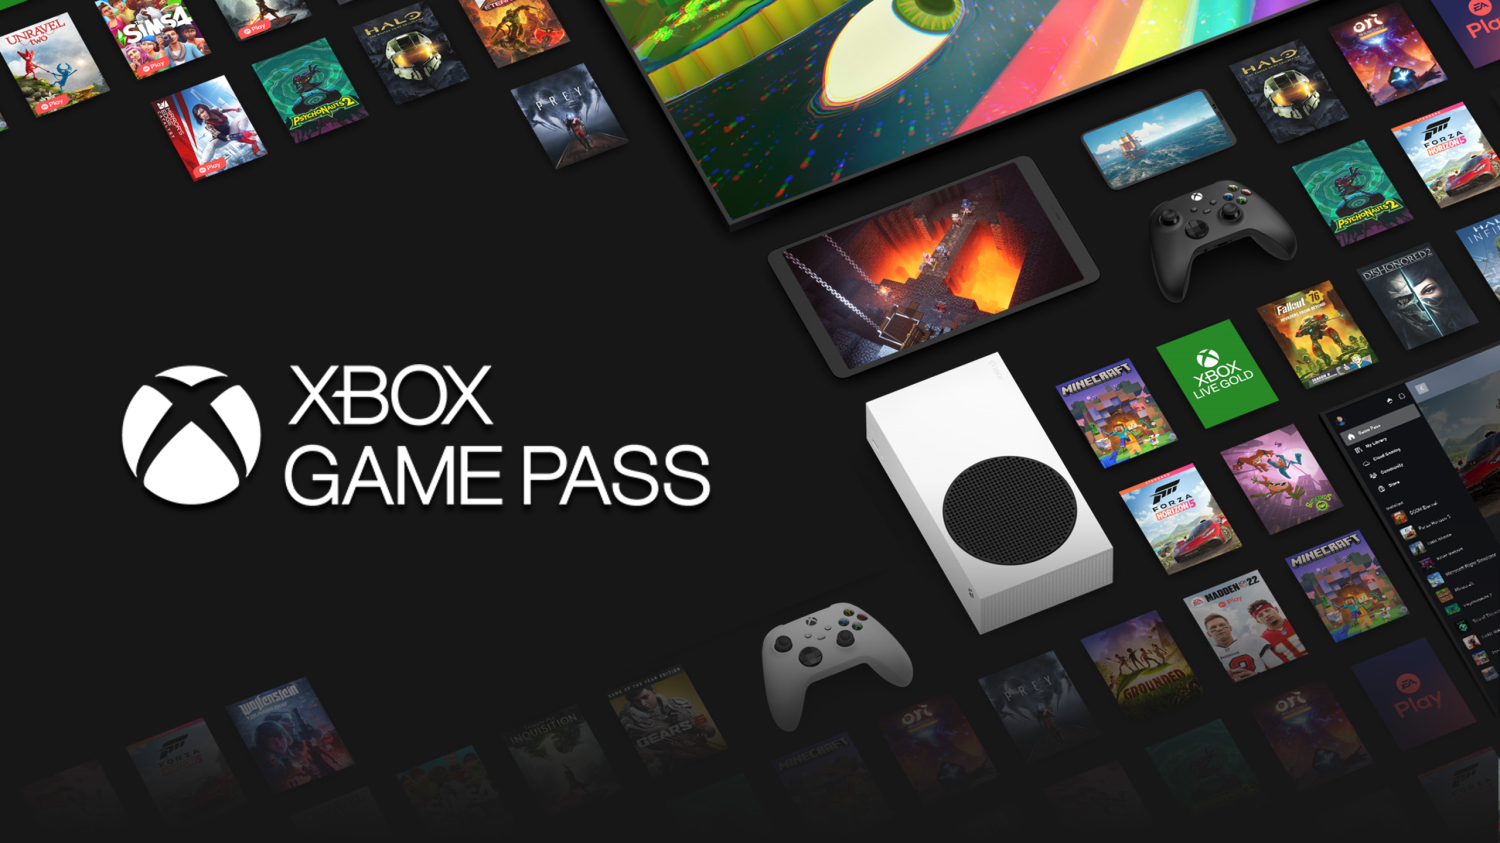 Phil Spencer: We have no plans to release Game Pass for